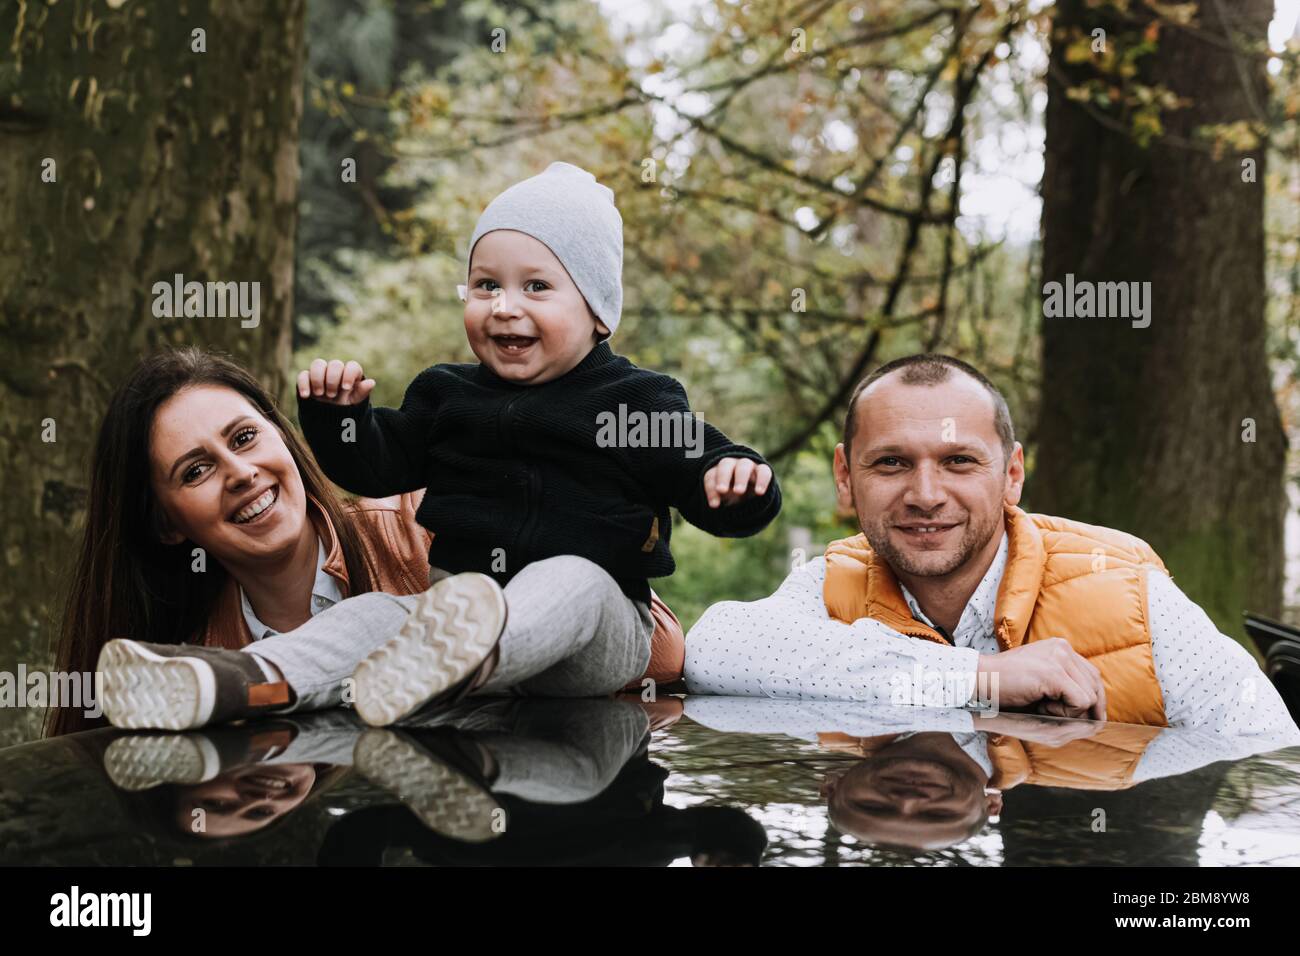 Happy family woman and man with 1 year old boy outdoors in park Stock Photo